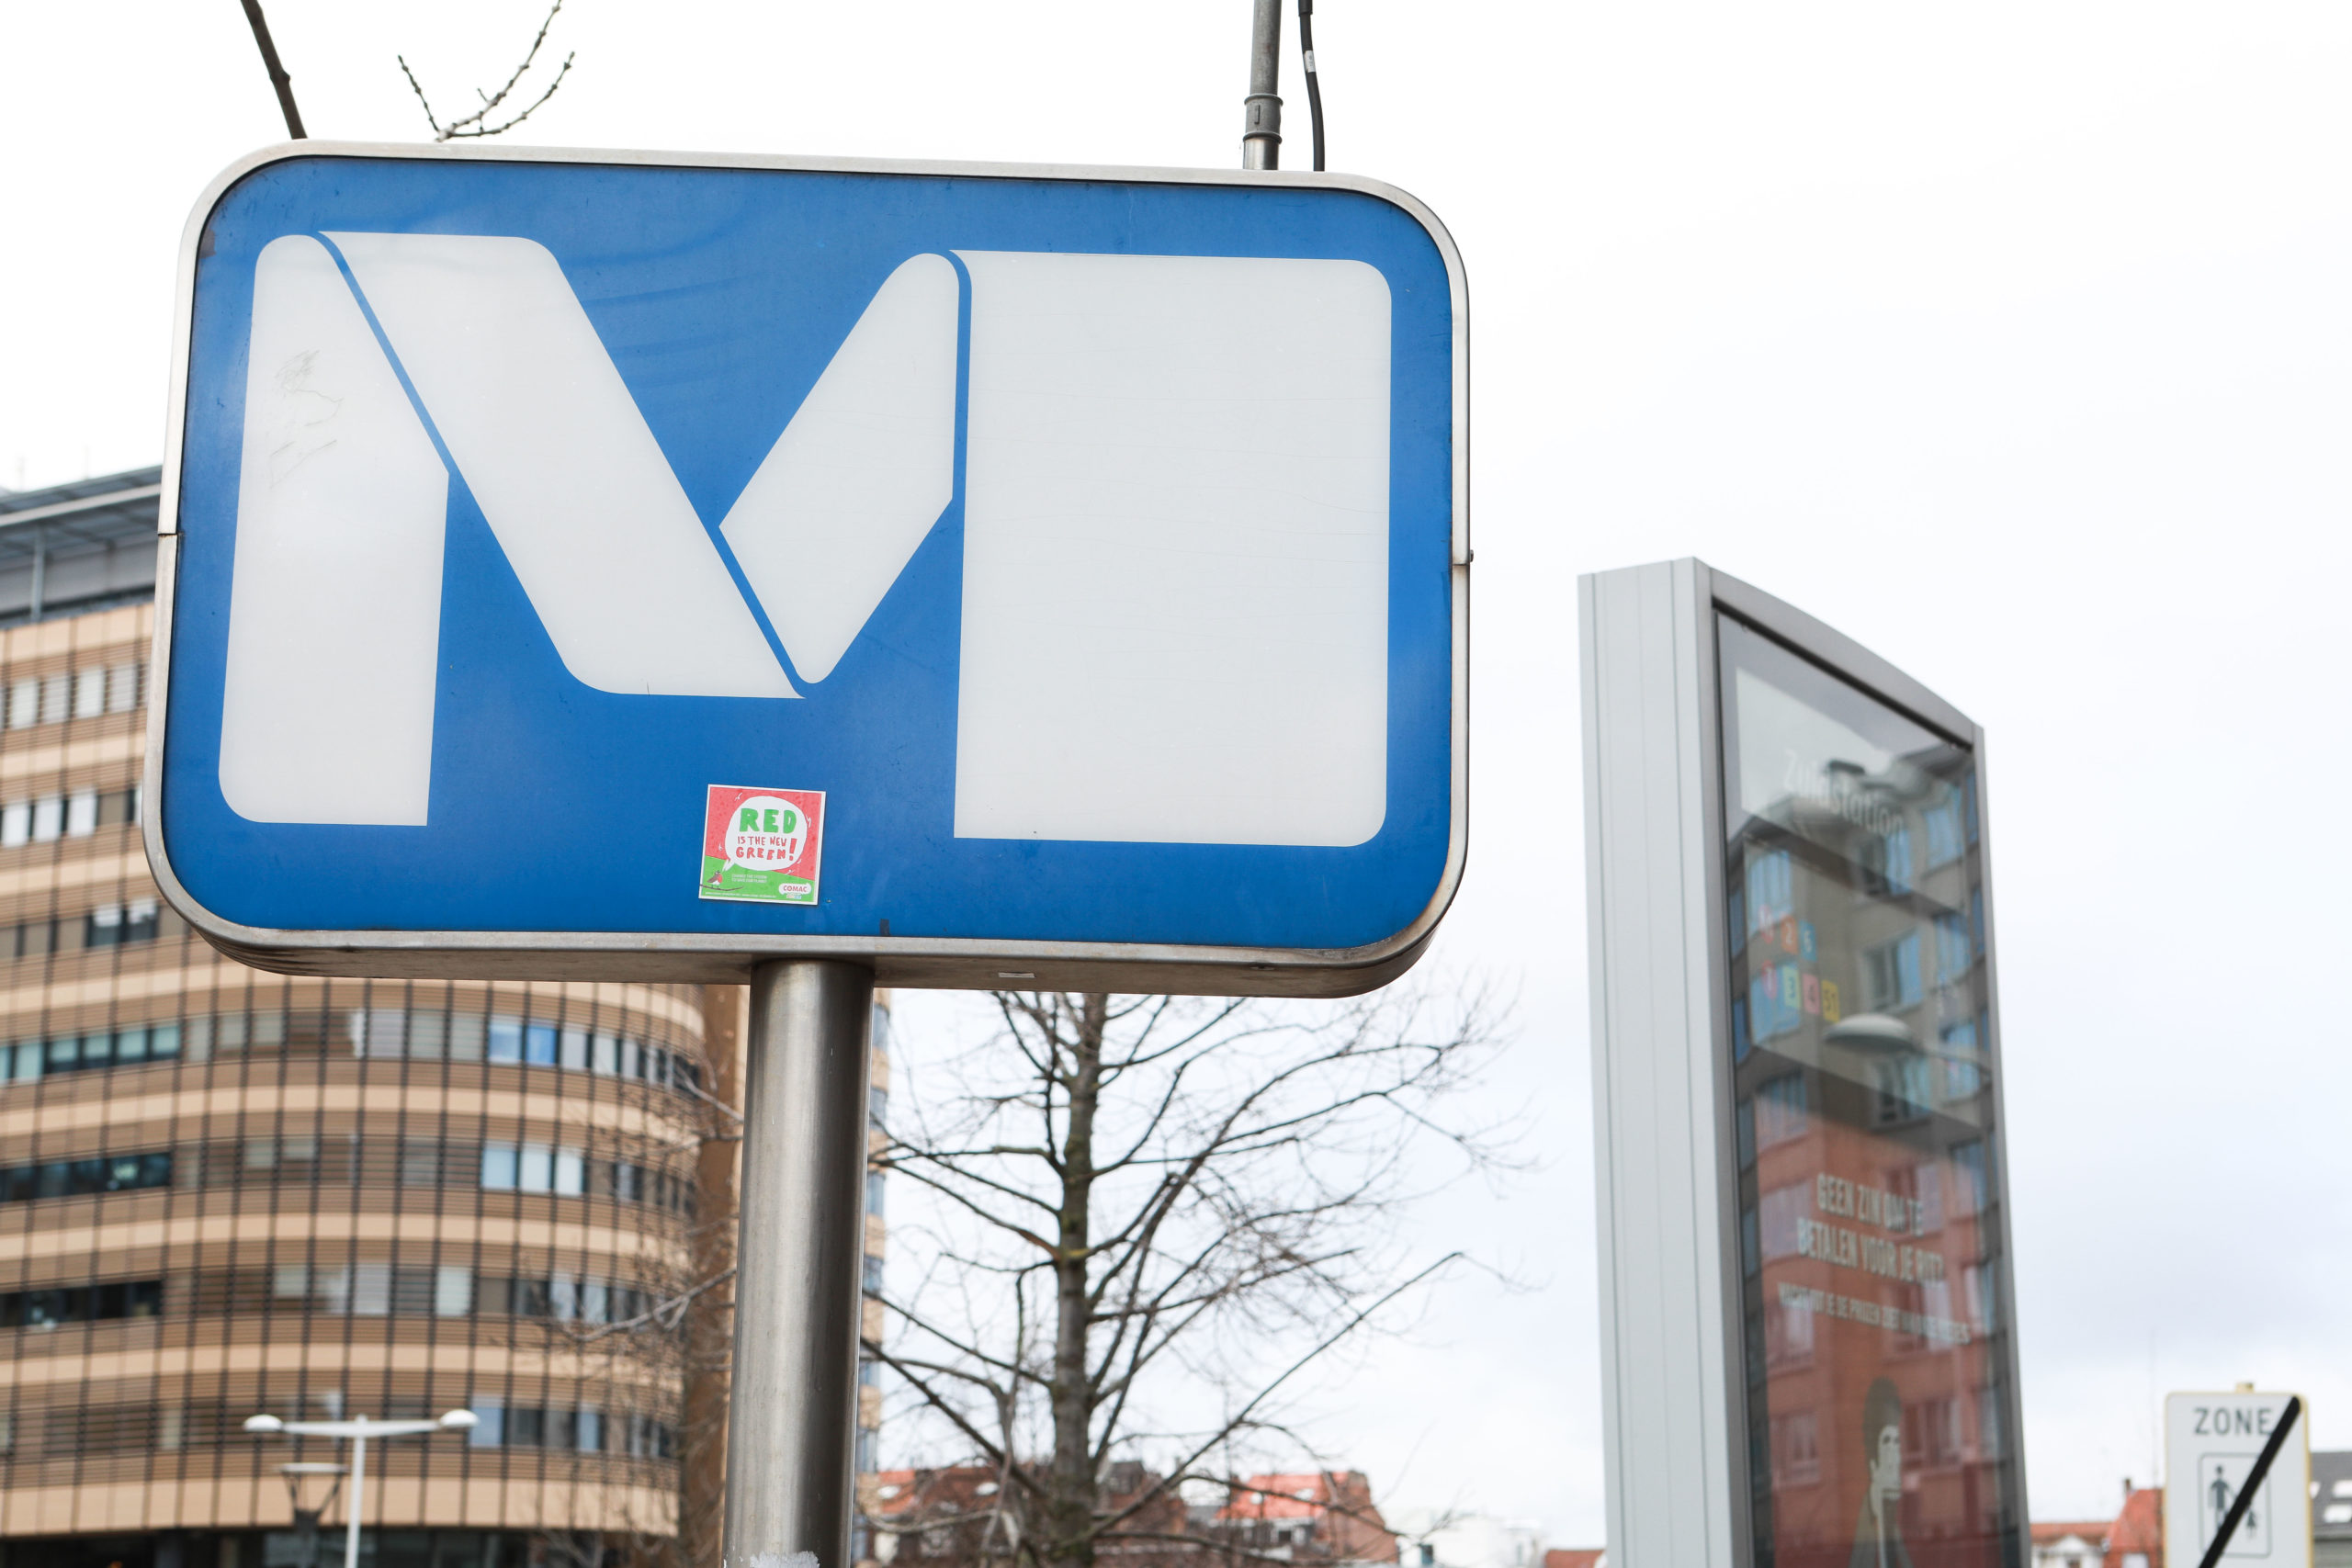 New record in 2019 for Brussels public transport